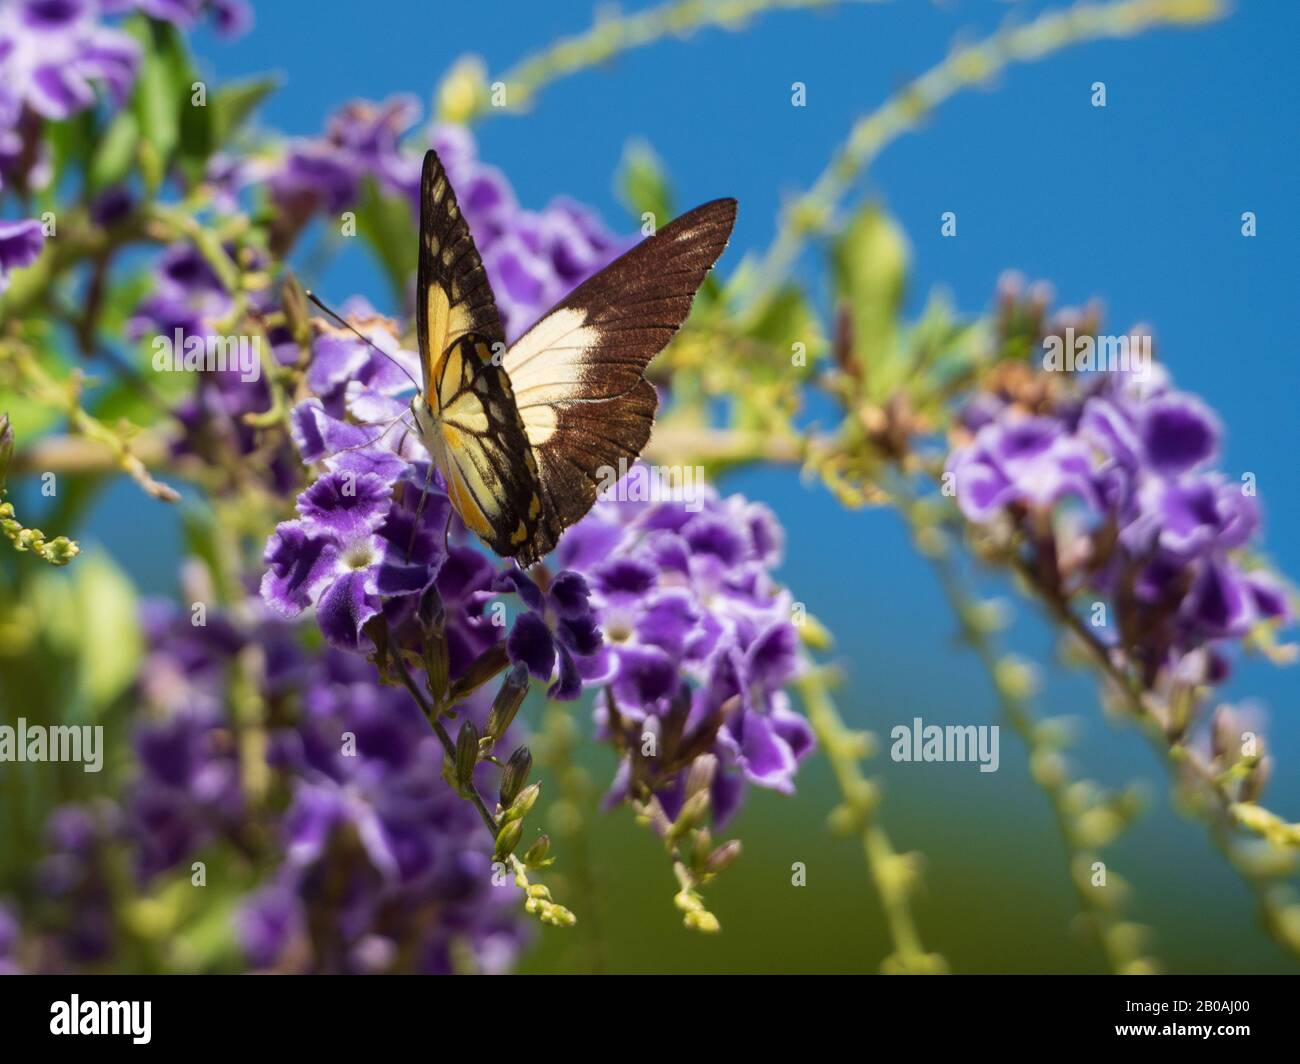 Pale orange, white and black wings of the Caper White Butterfly on beautiful purple flowers of the Geisha Girl plant or Duranta Repens, Australia Stock Photo